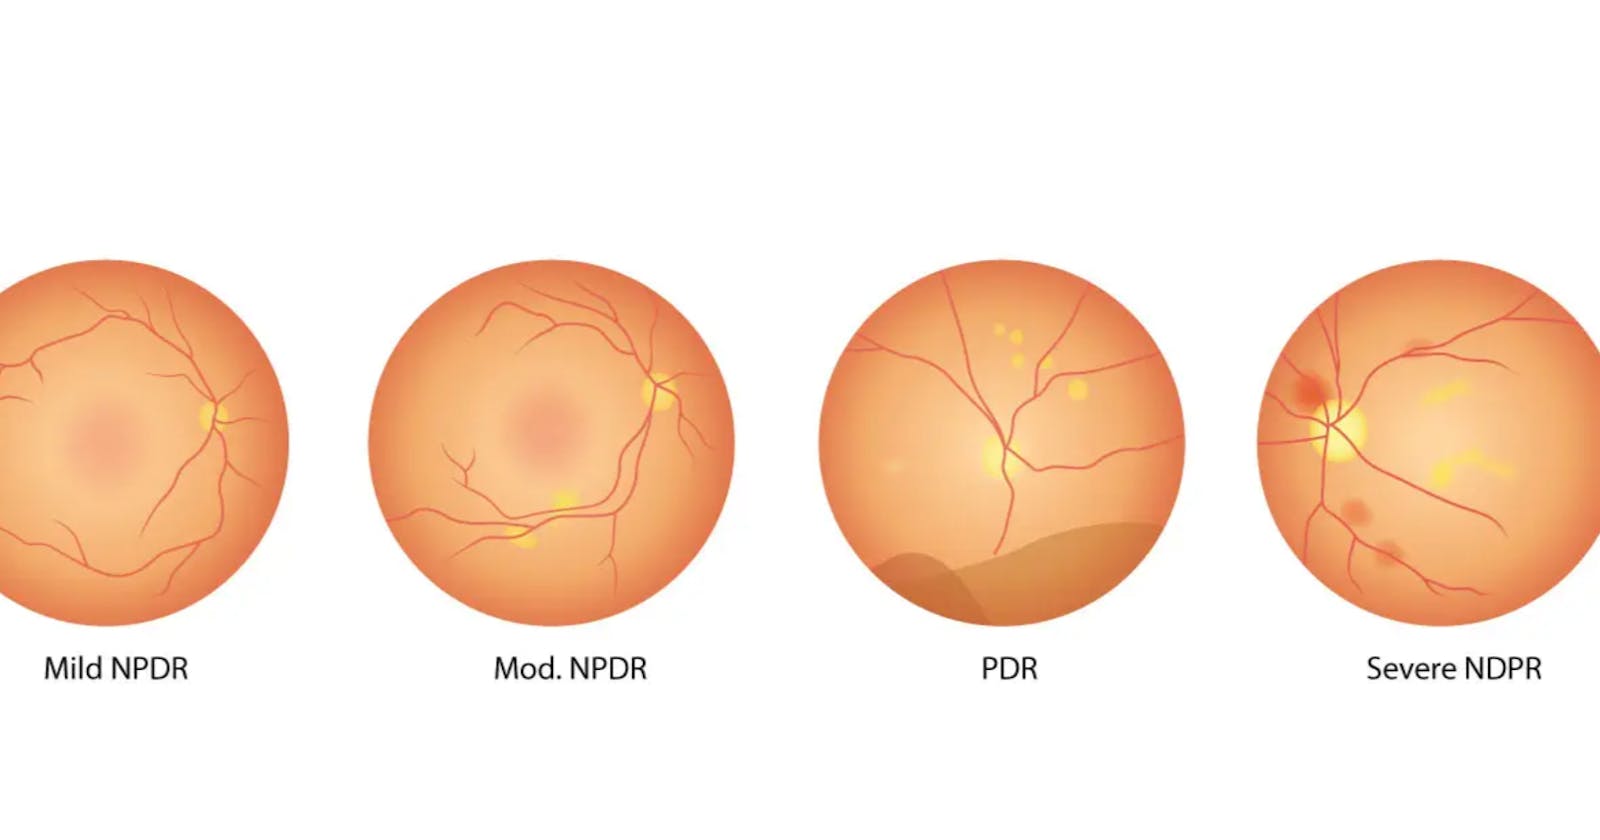 Decoding Diabetic Retinopathy: A Deep Dive into Multi-Class Classification with SVM and ANN